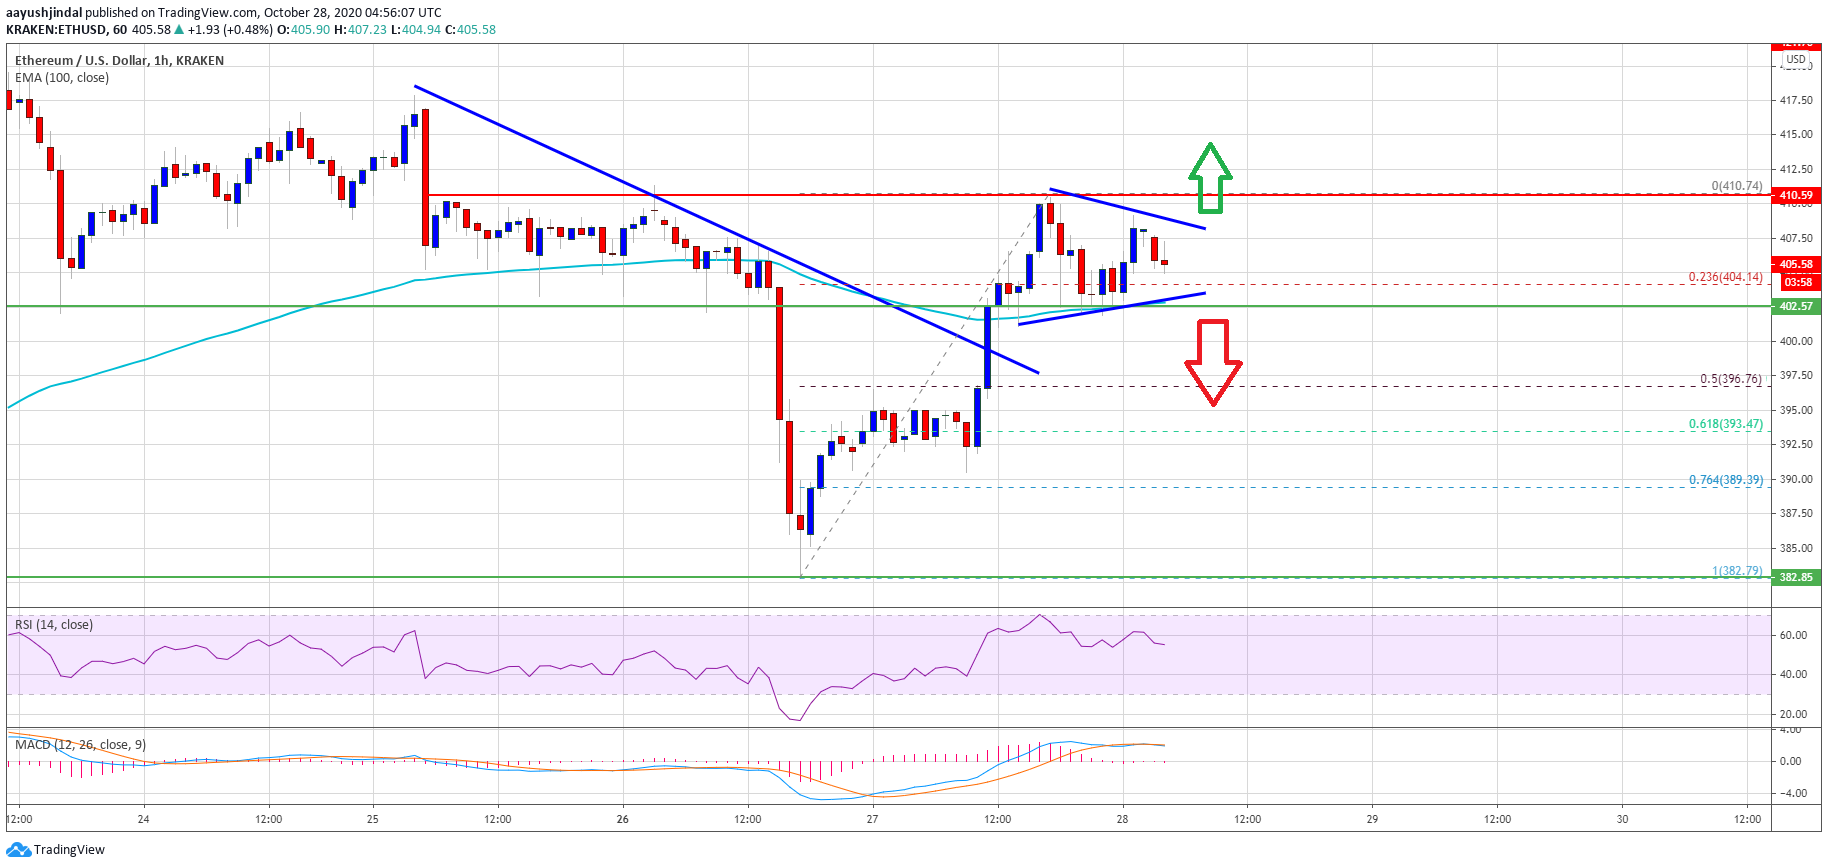 TA: Ethereum Bullish Continuation Pattern Suggests Increase Above $410